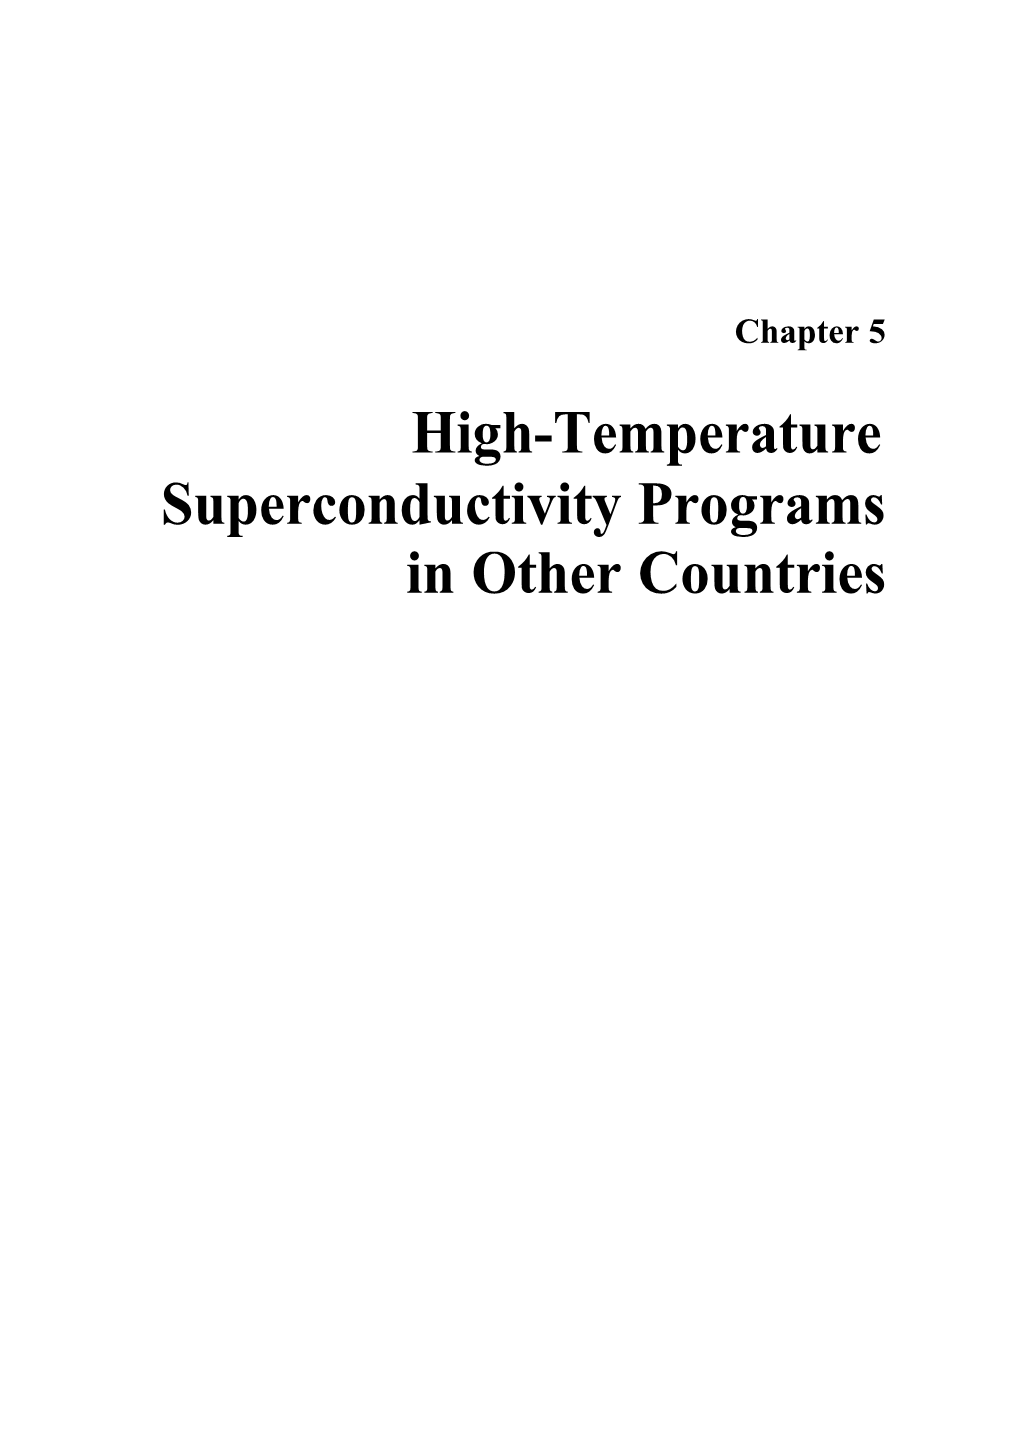 High-Temperature Superconductivity in Perspective